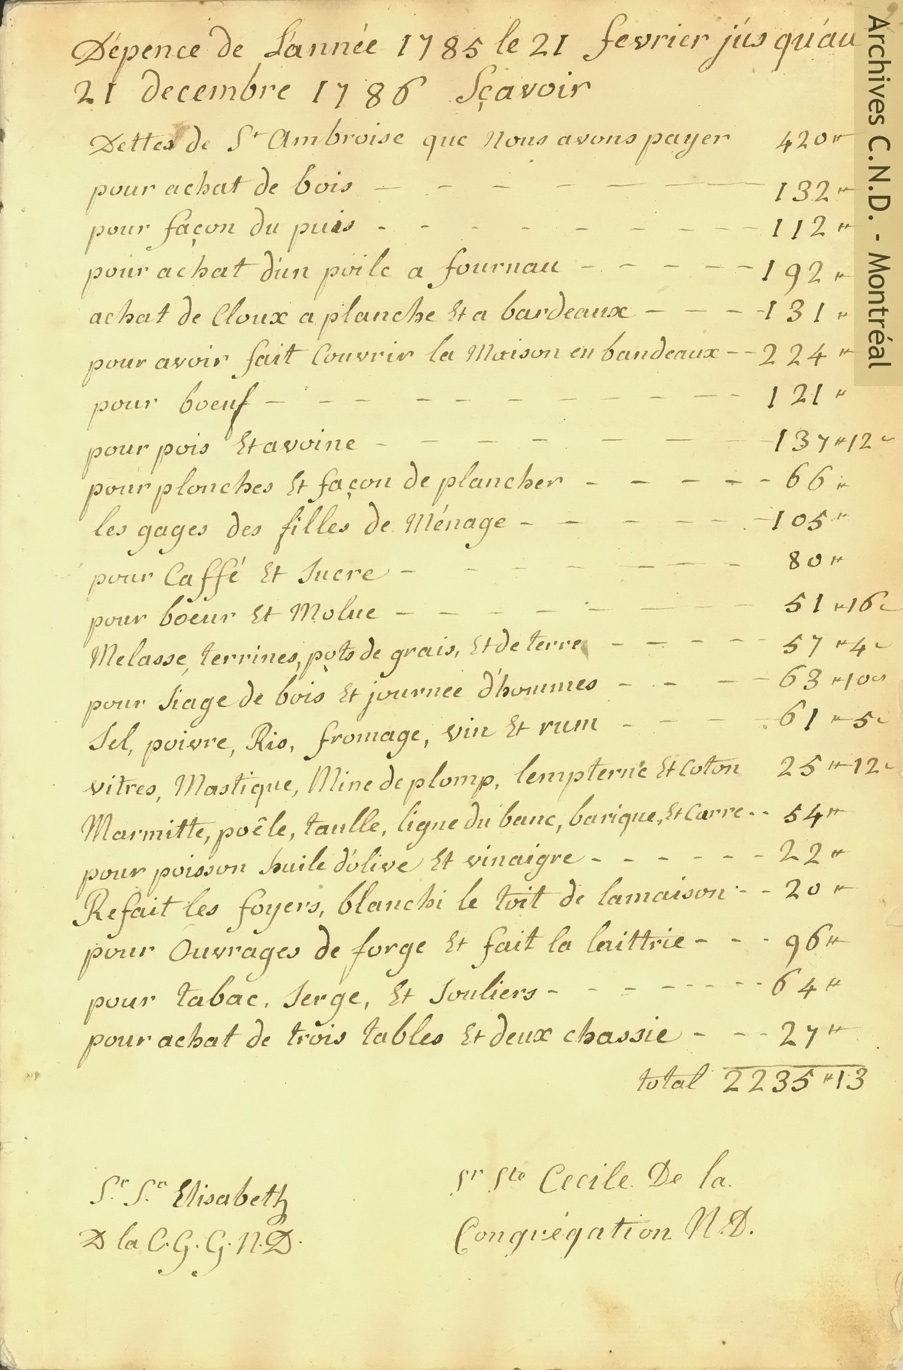 Page taken from the report on revenues and expenditures of the convent